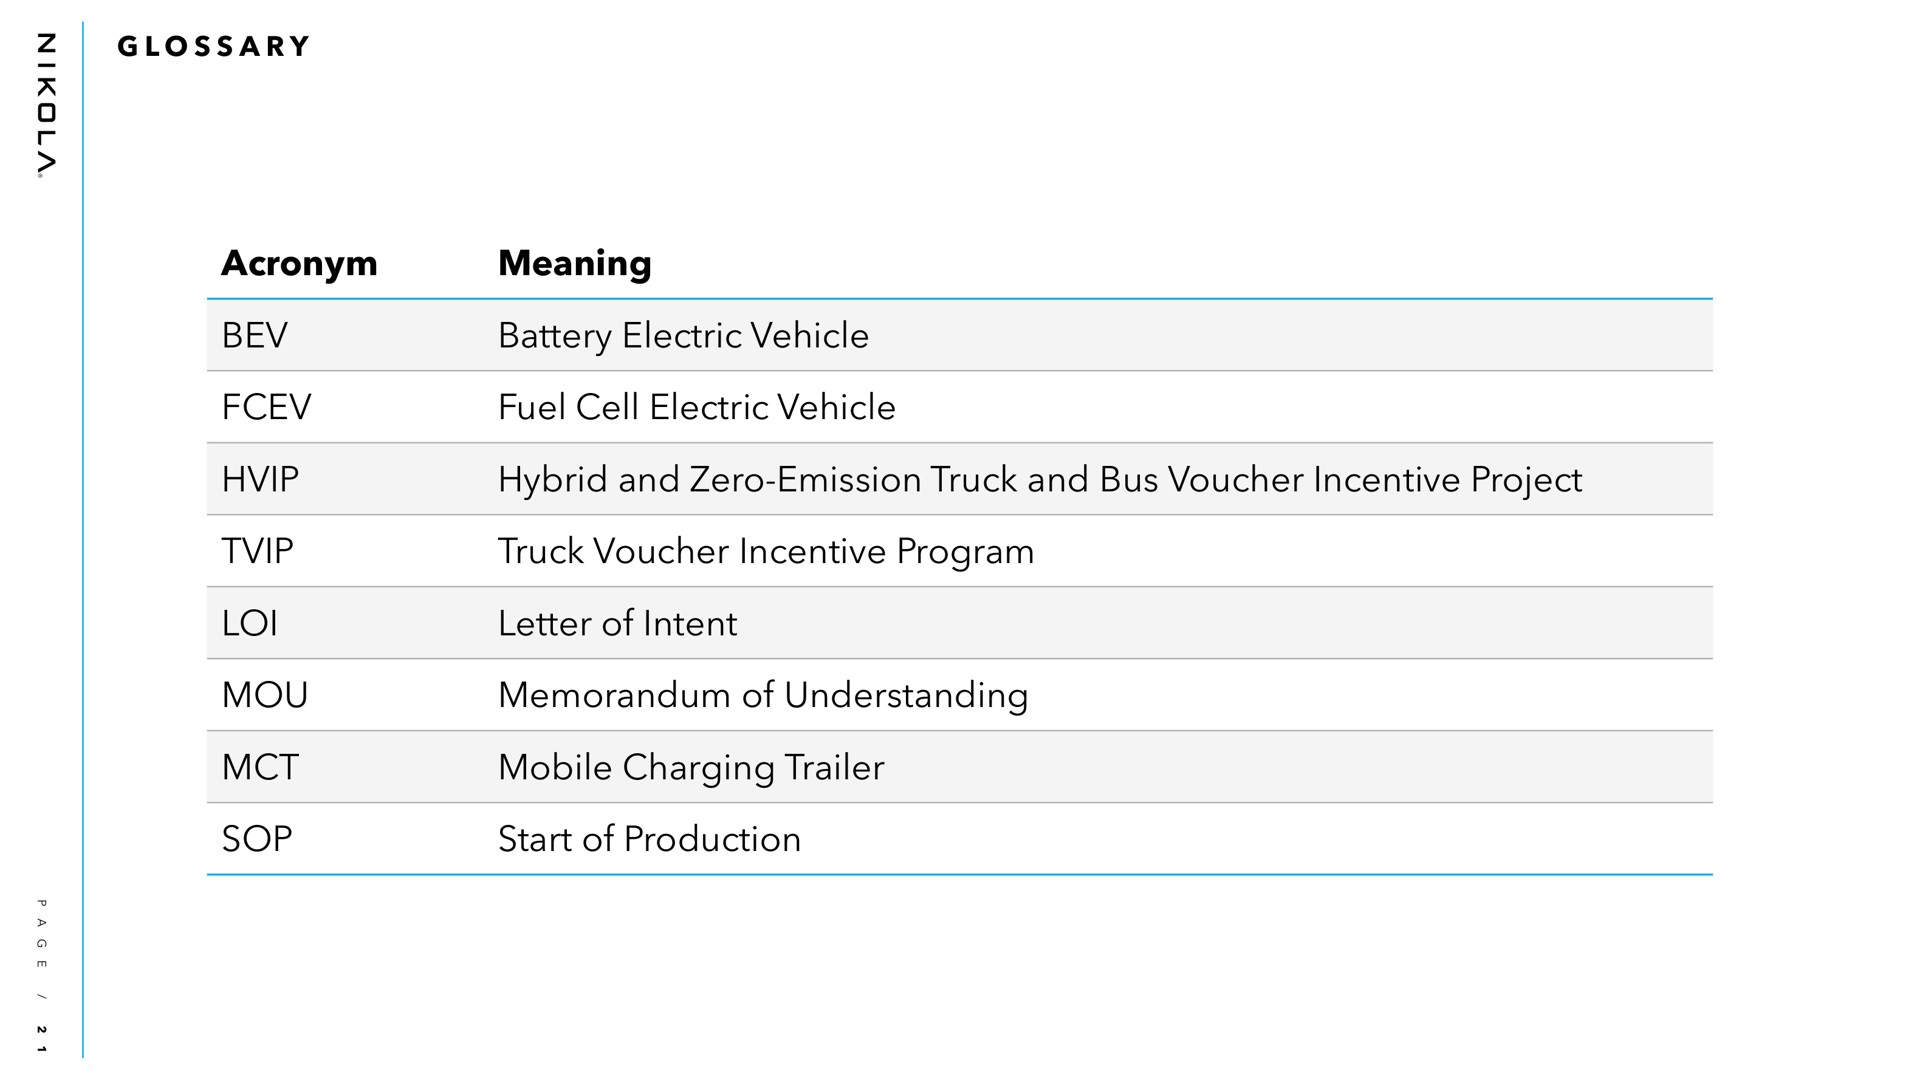 a acronym meaning battery electric vehicle fuel cell electric vehicle hybrid and zero emission truck and bus voucher incentive project truck voucher incentive program letter of intent memorandum of understanding mobile charging trailer start of production mou sop glossary | Nikola